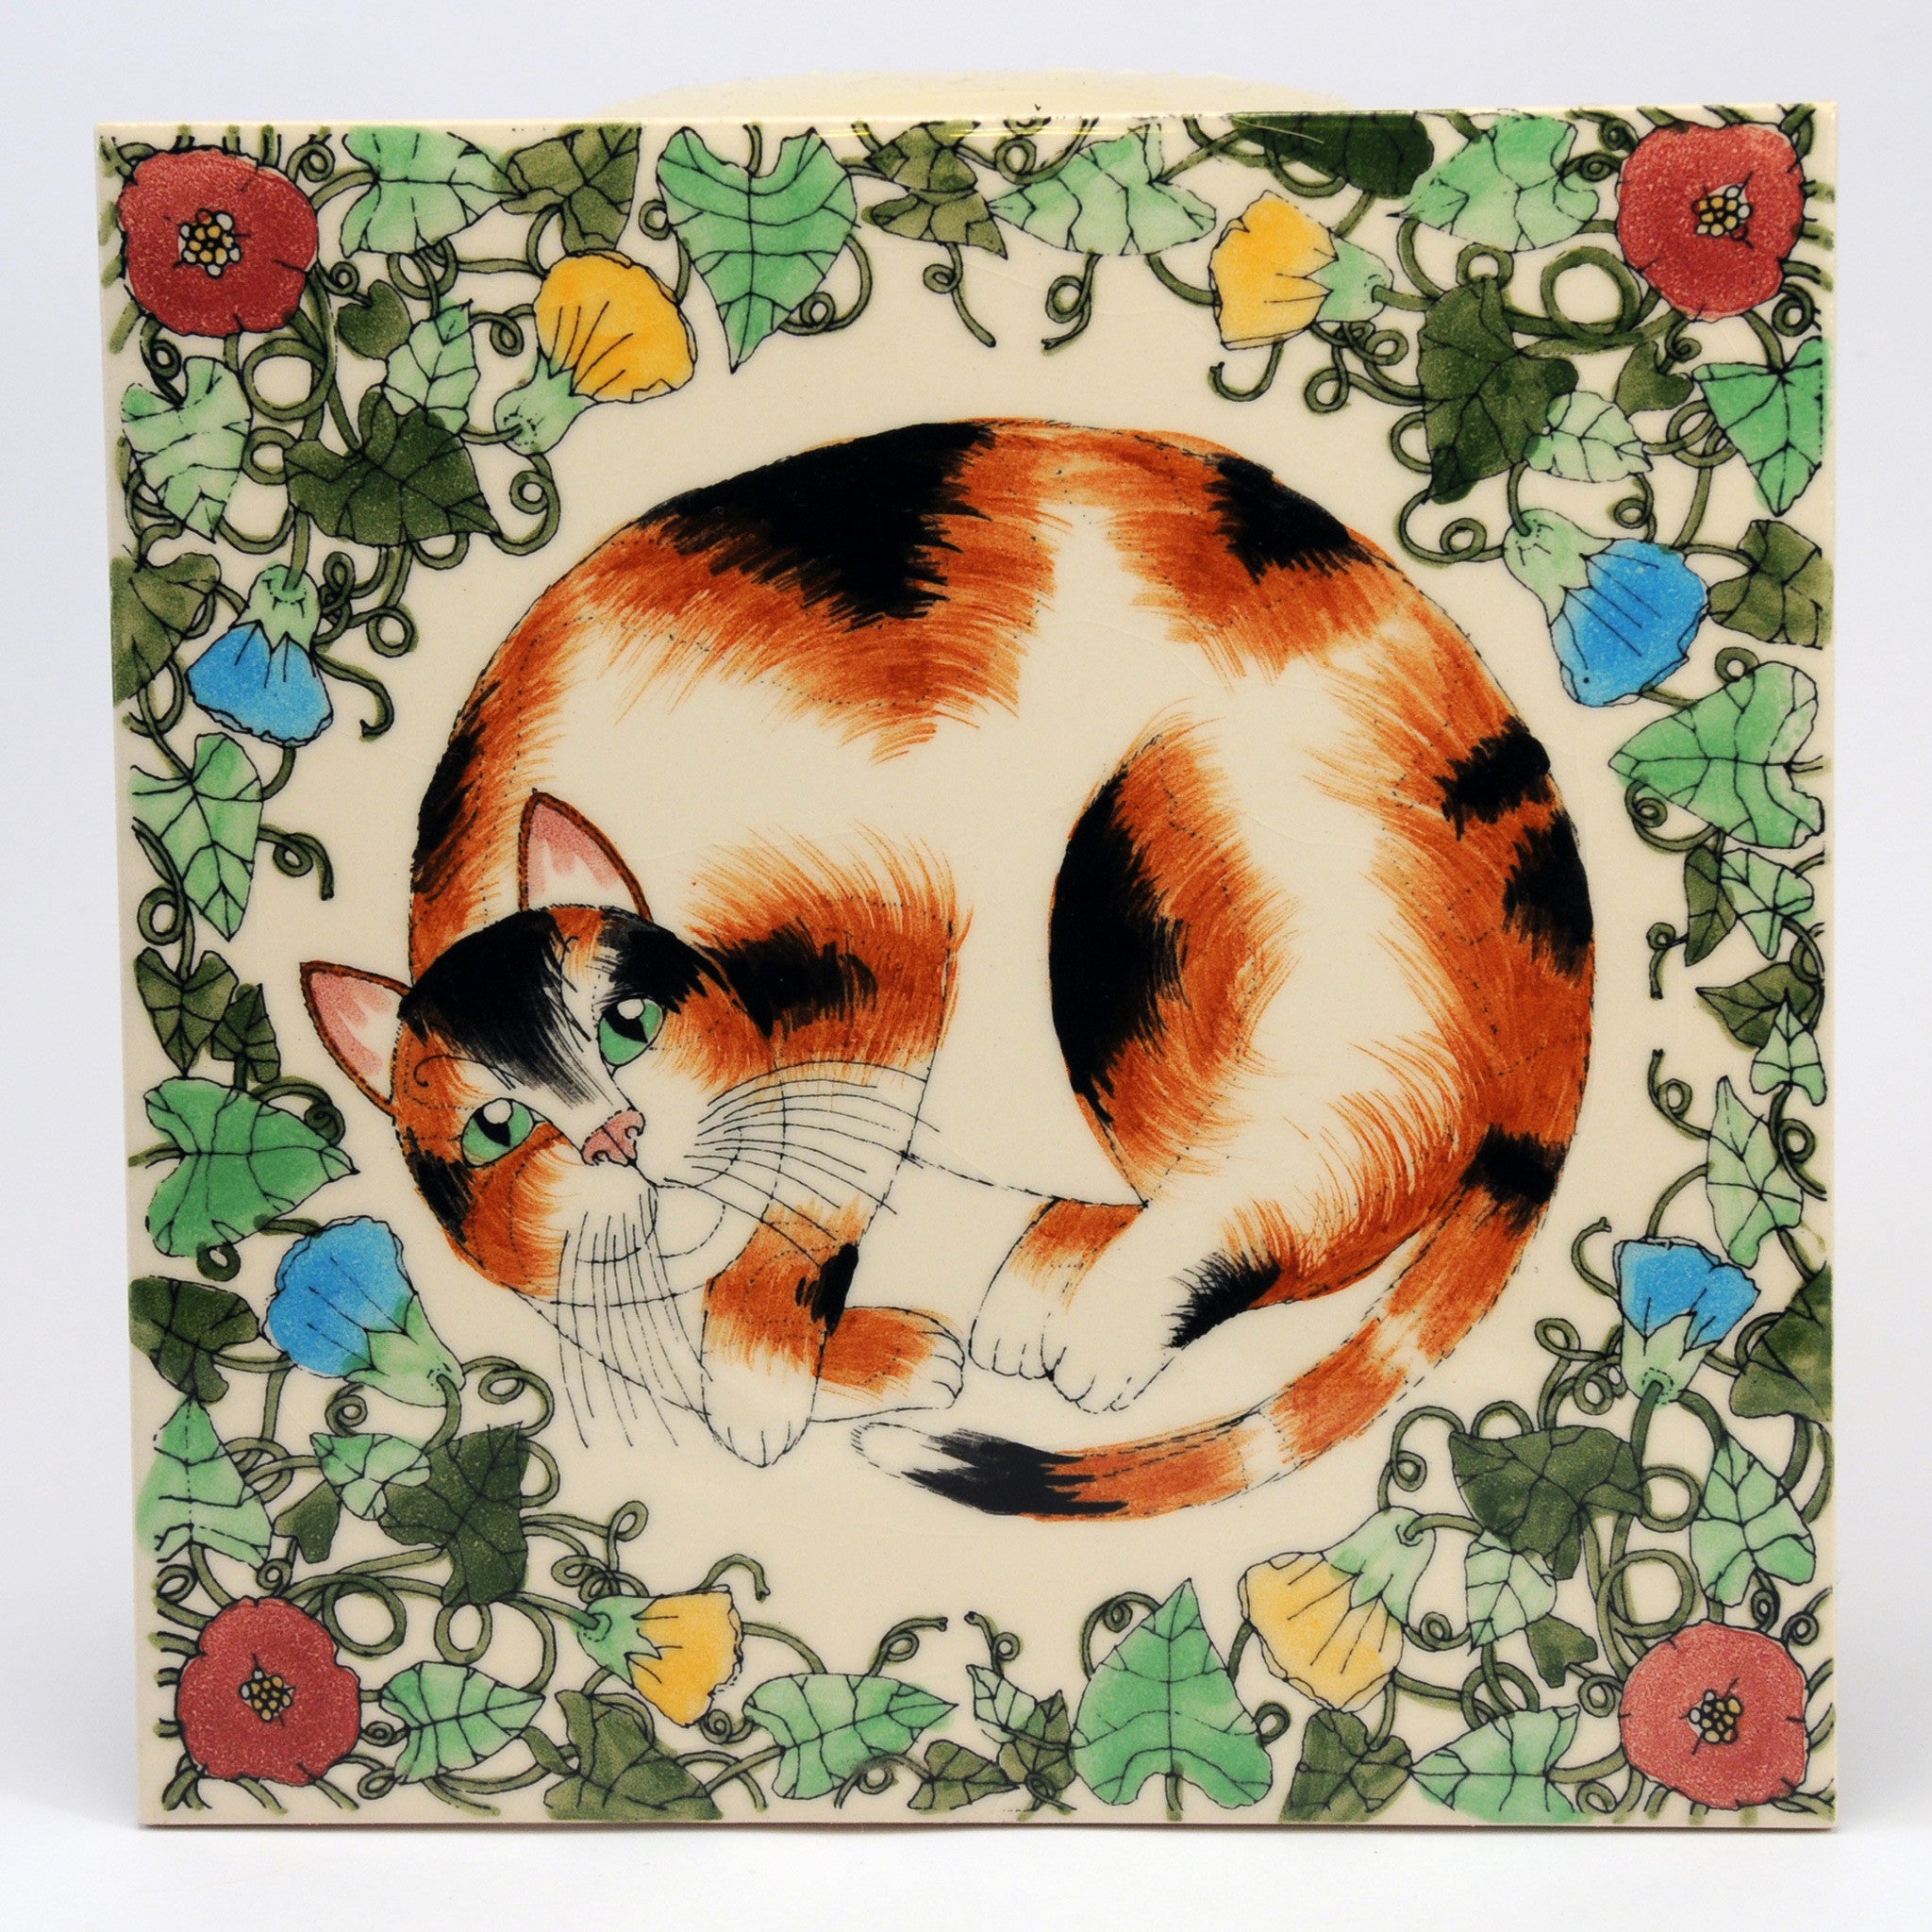 Decorated Ceramic  Tiles  Cat  in flowers by Florian Katoomie